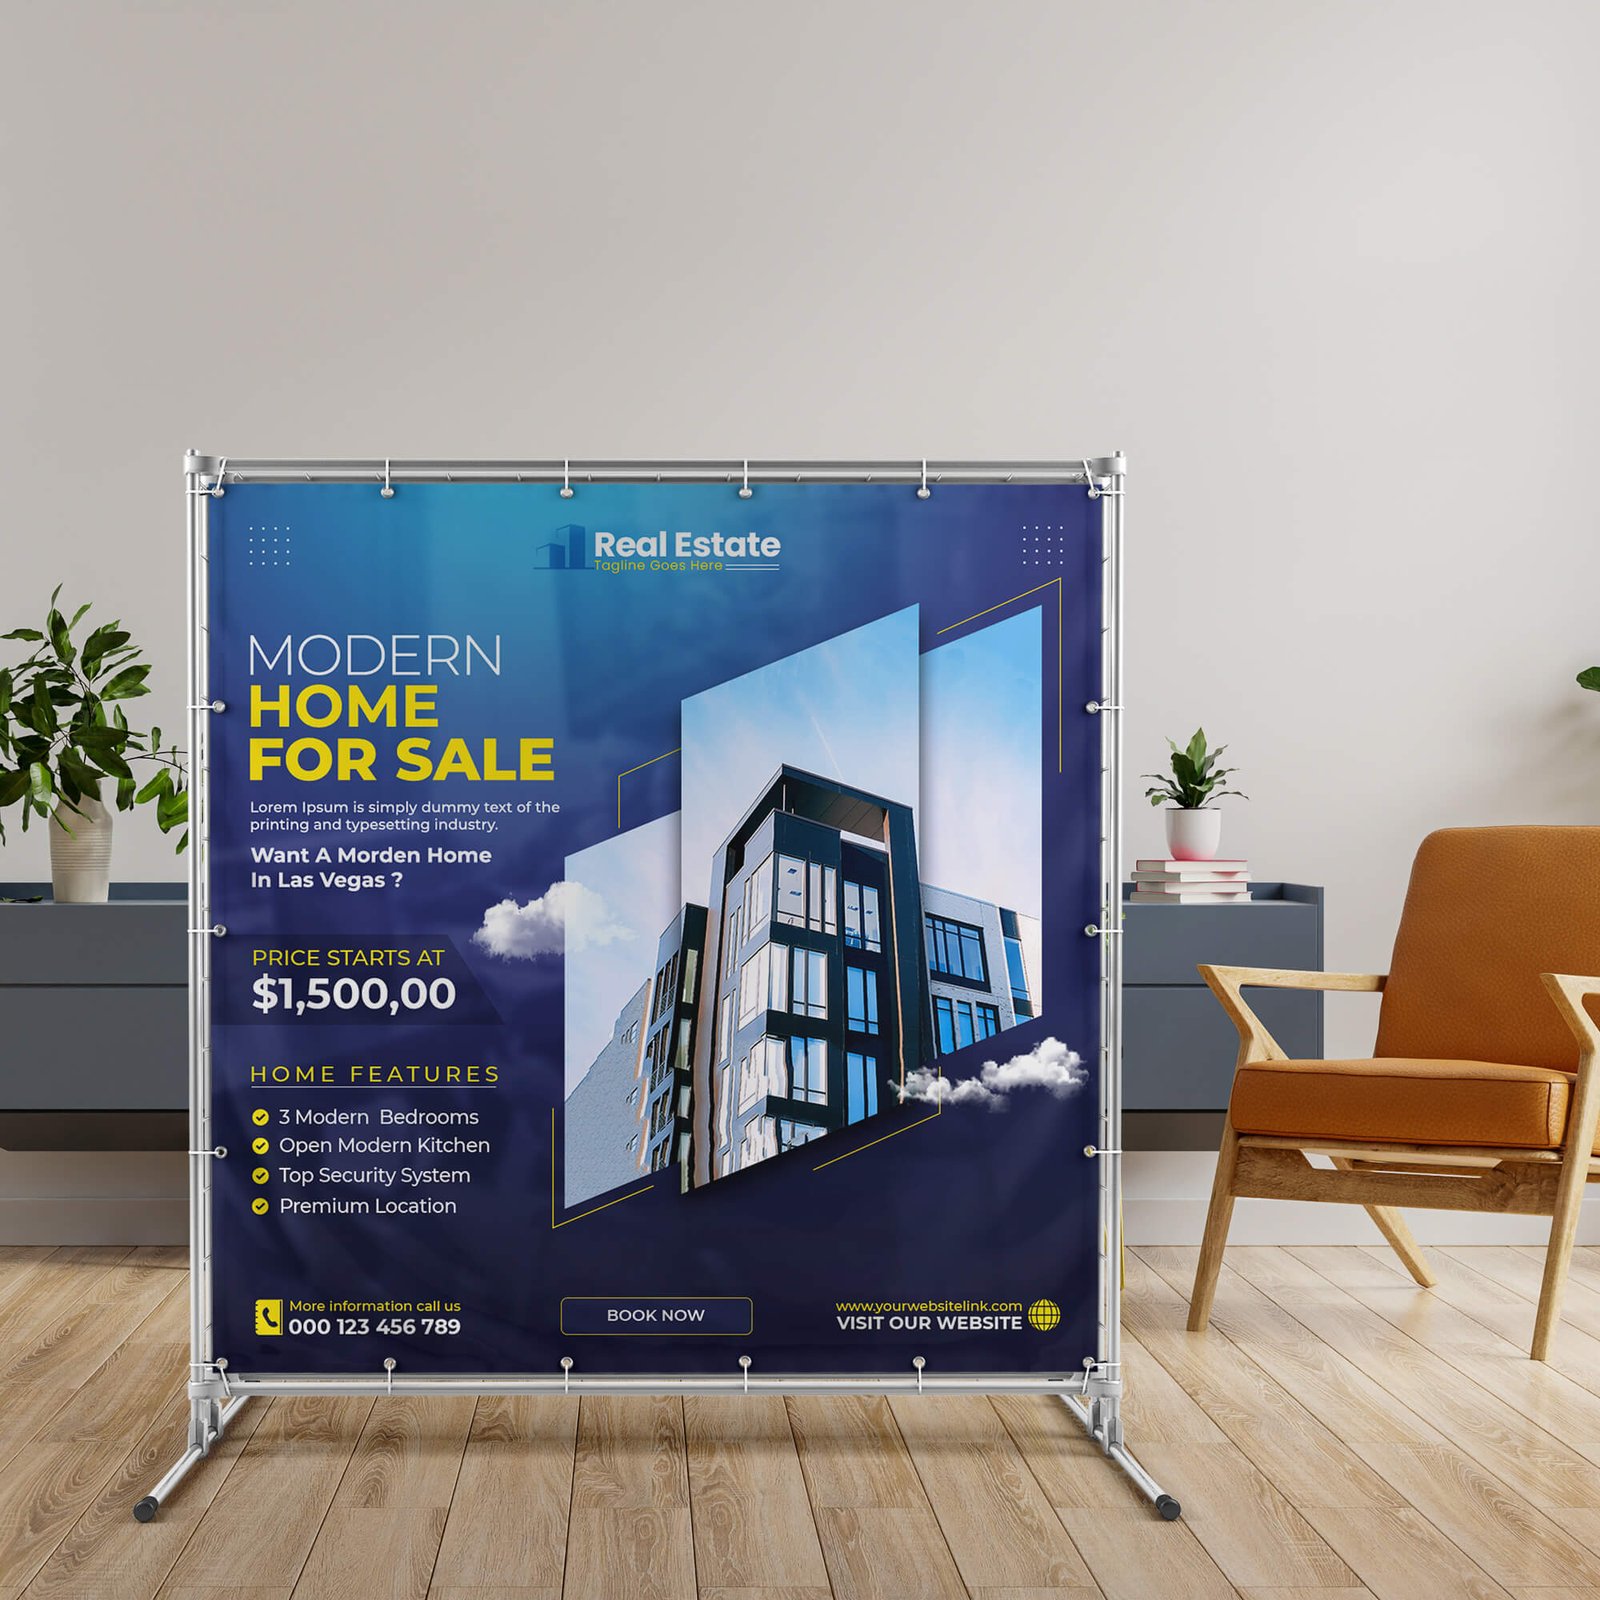 Free Square Banner Mockup PSD Template (1)